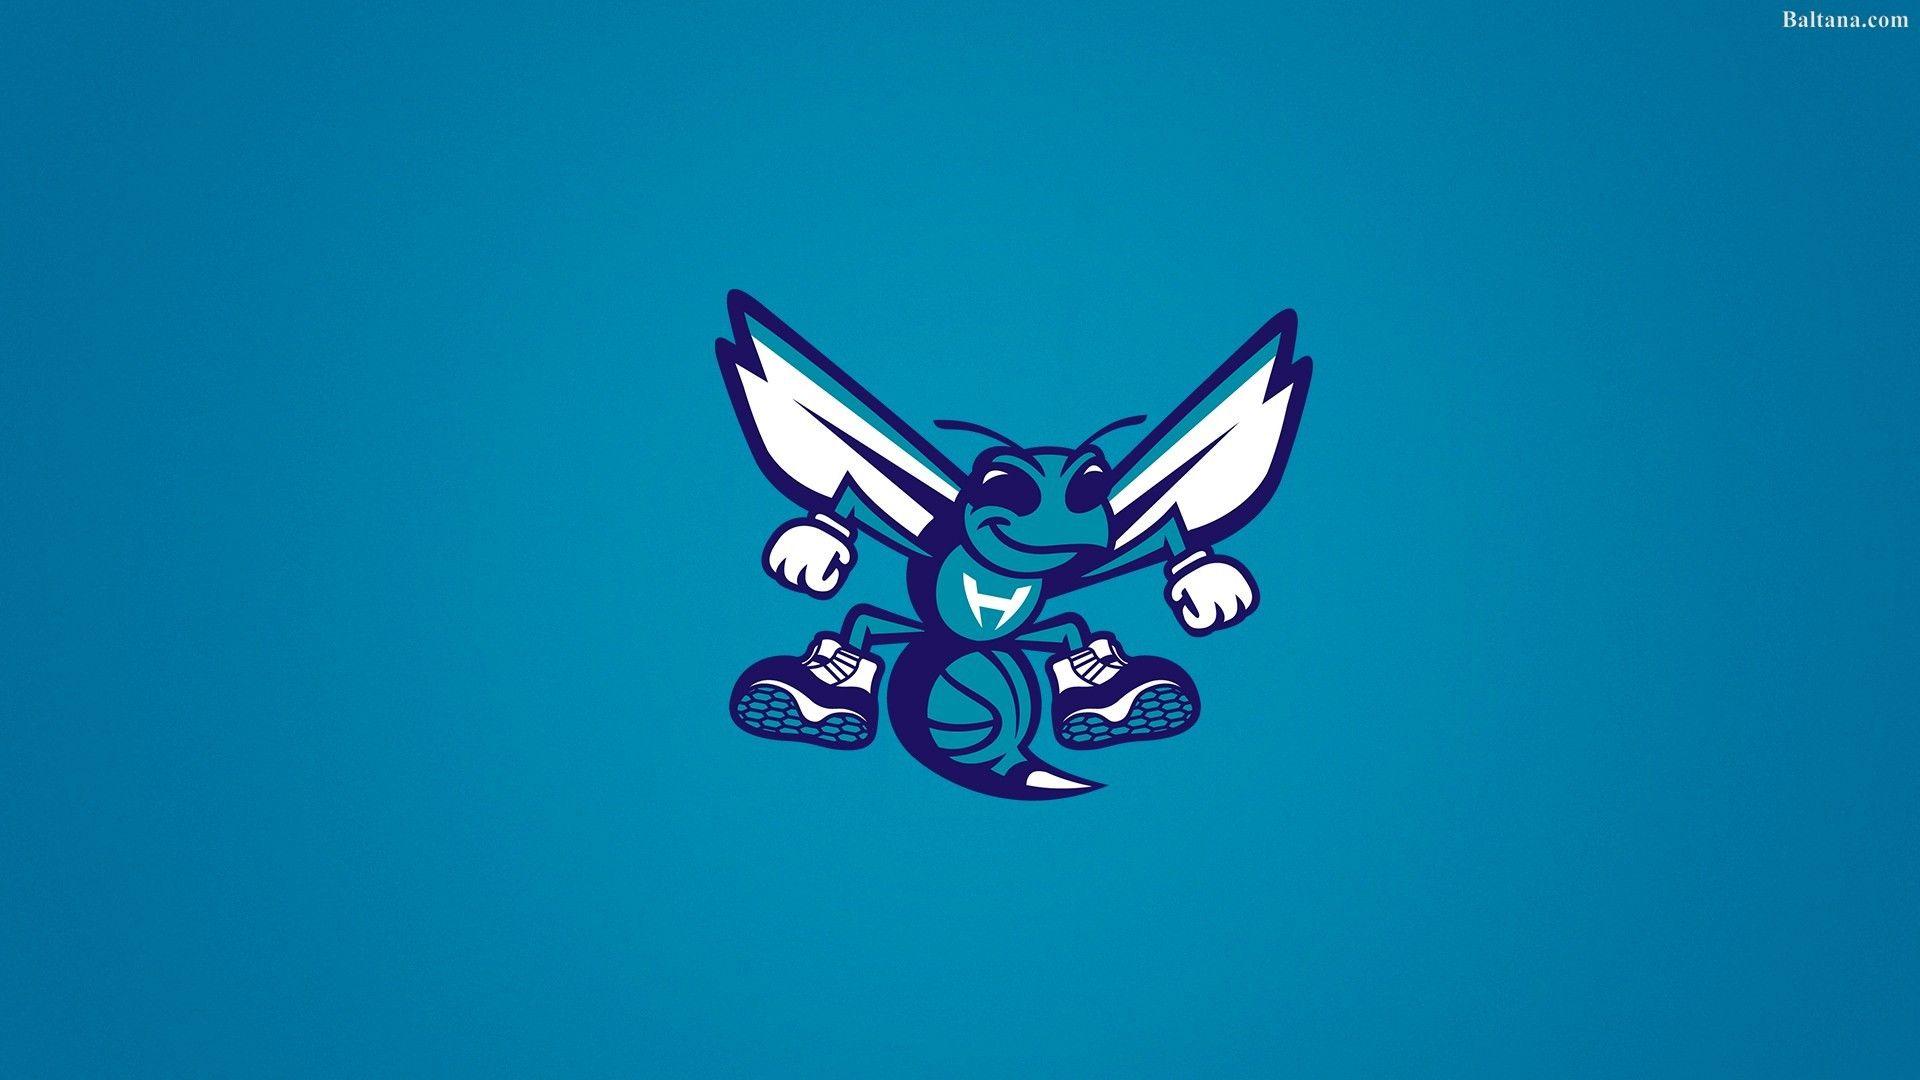 Charlotte Hornets IPhone Wallpaper 79 images